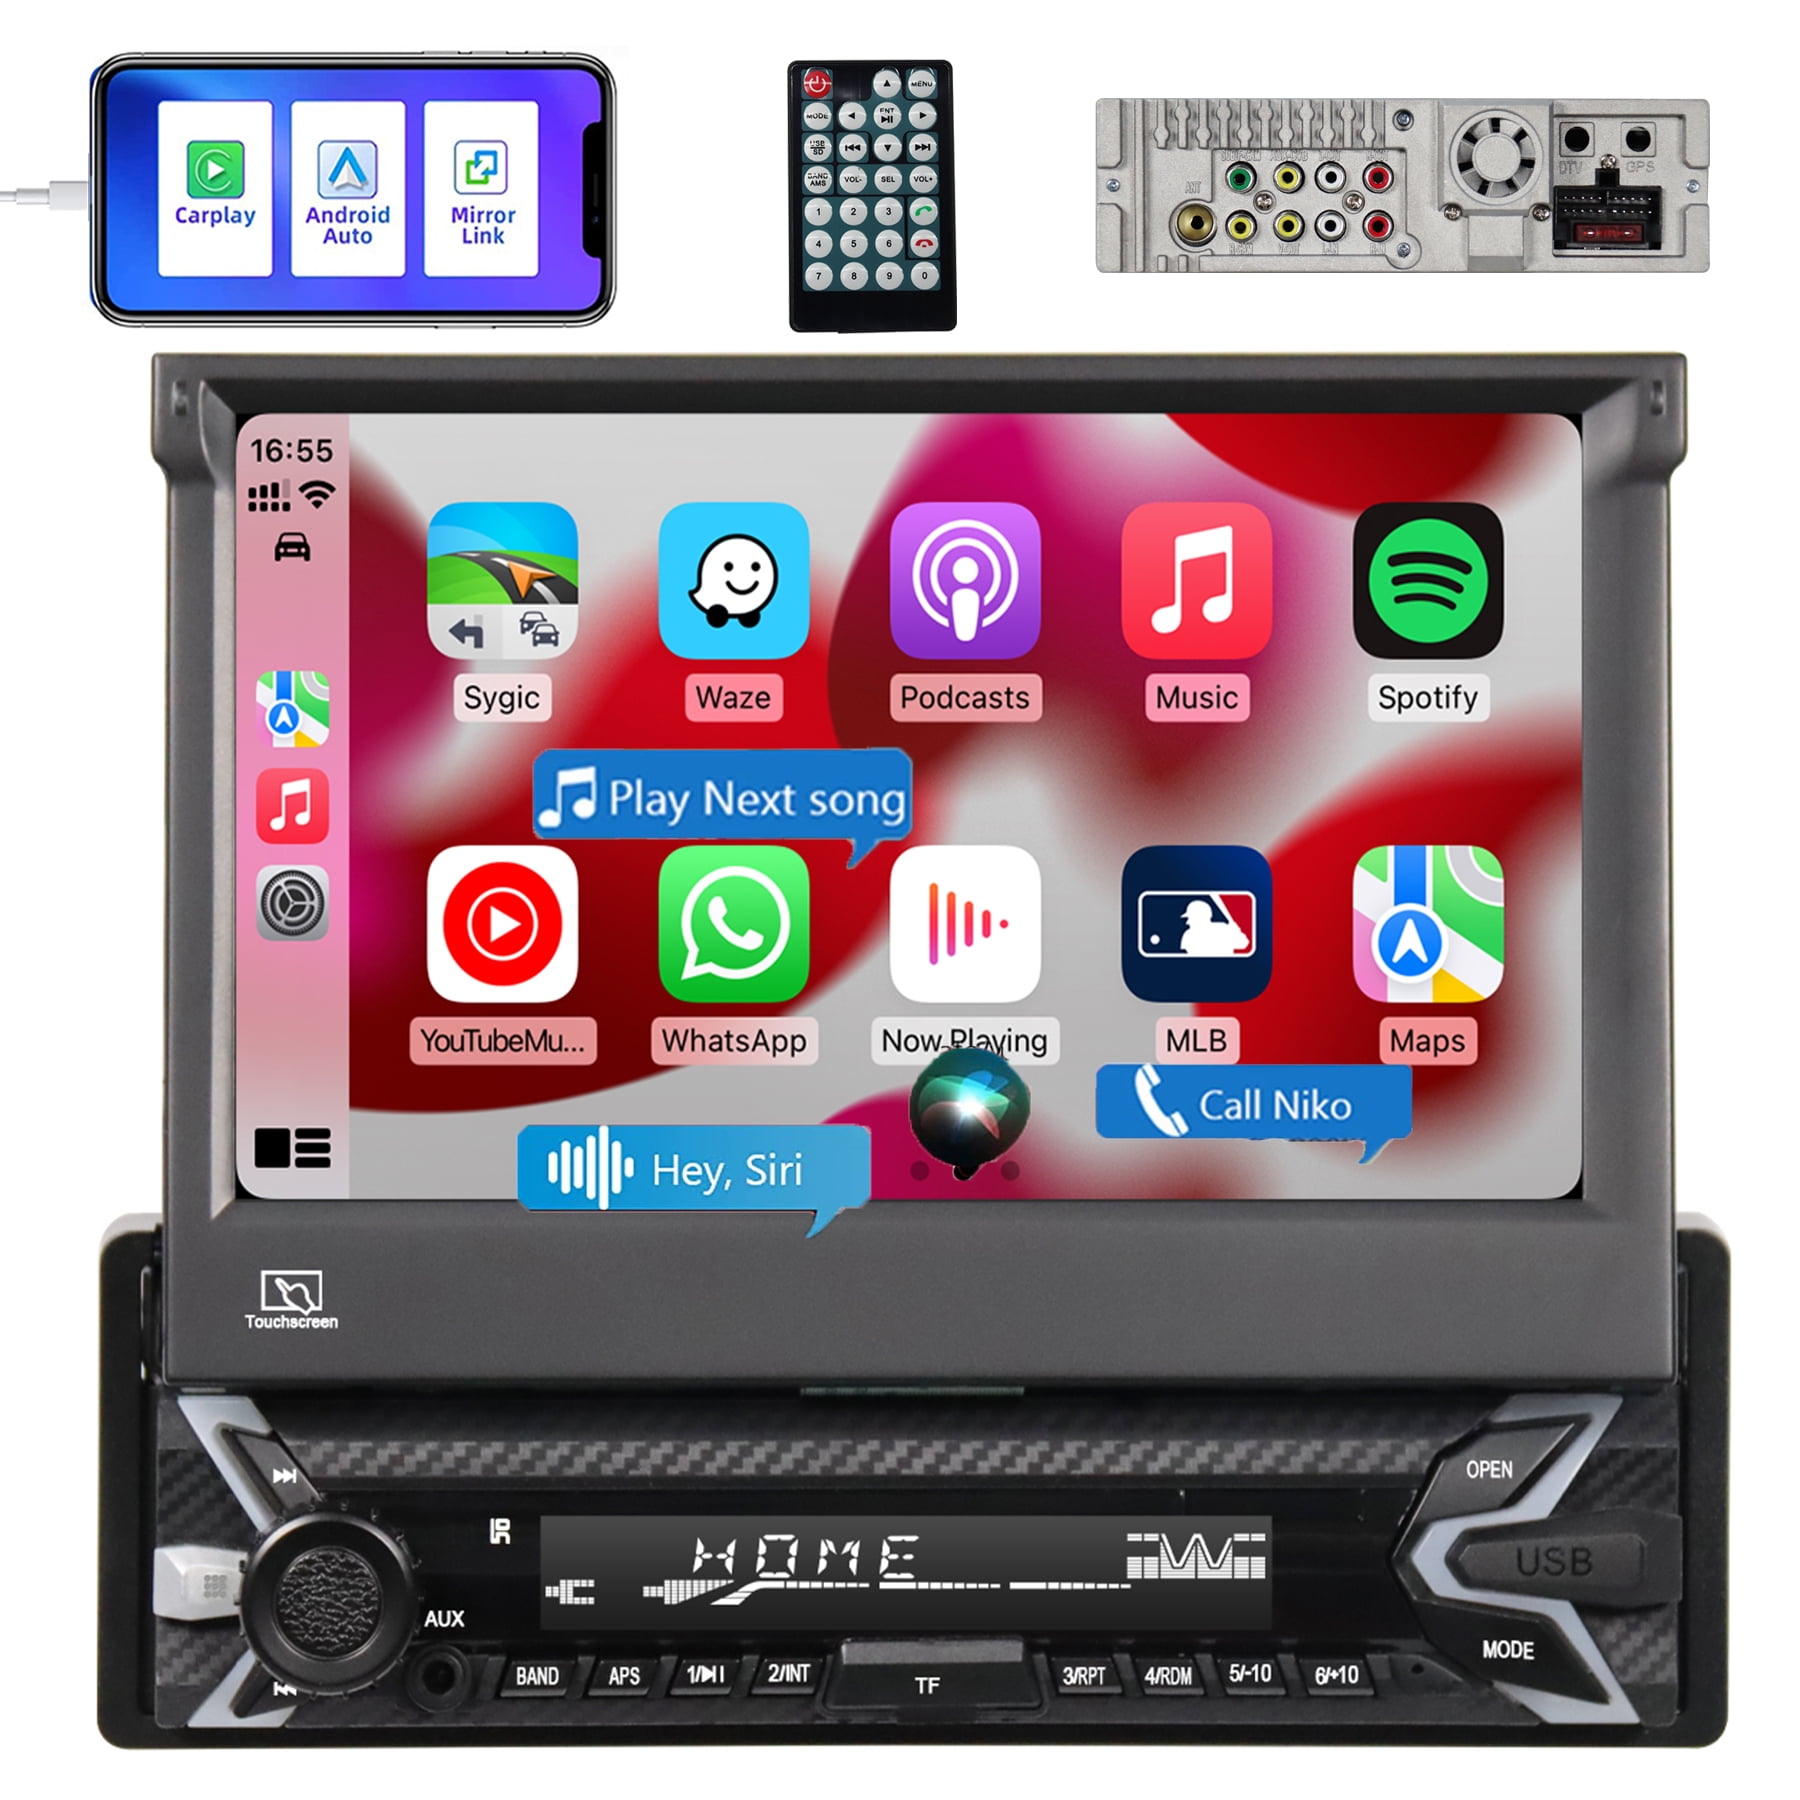 Single DIN In Dash Car Stereo with Apple Android Auto Head Unit inch Flip Out Touch Screen Audio Video ,Radio,Bluetooth, Built-in Microphone,USB SD + Wireless Camera - Walmart.com